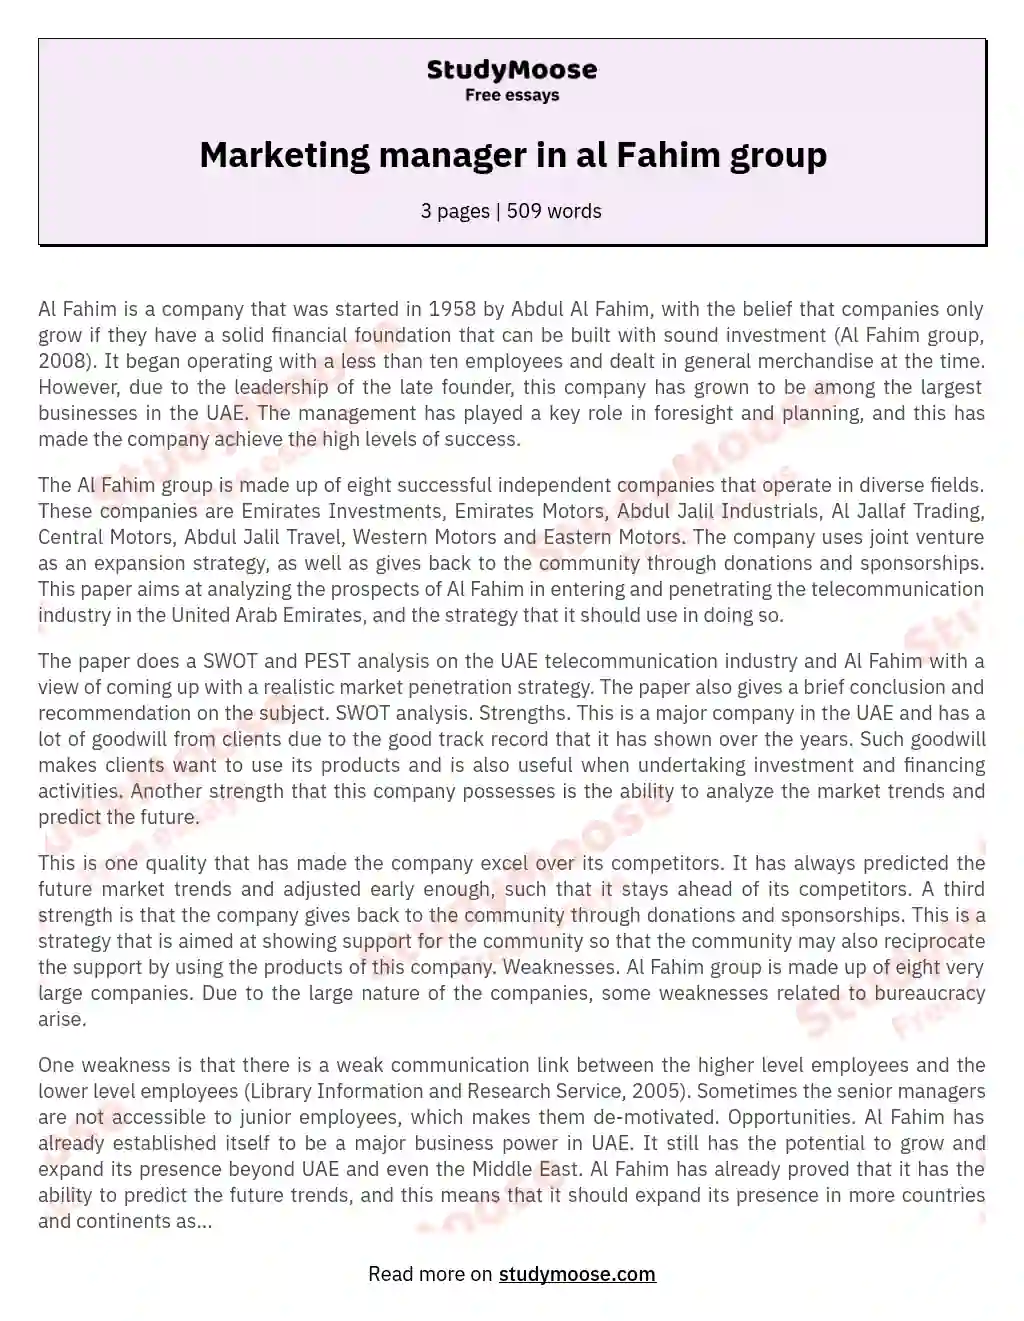 Marketing manager in al Fahim group essay